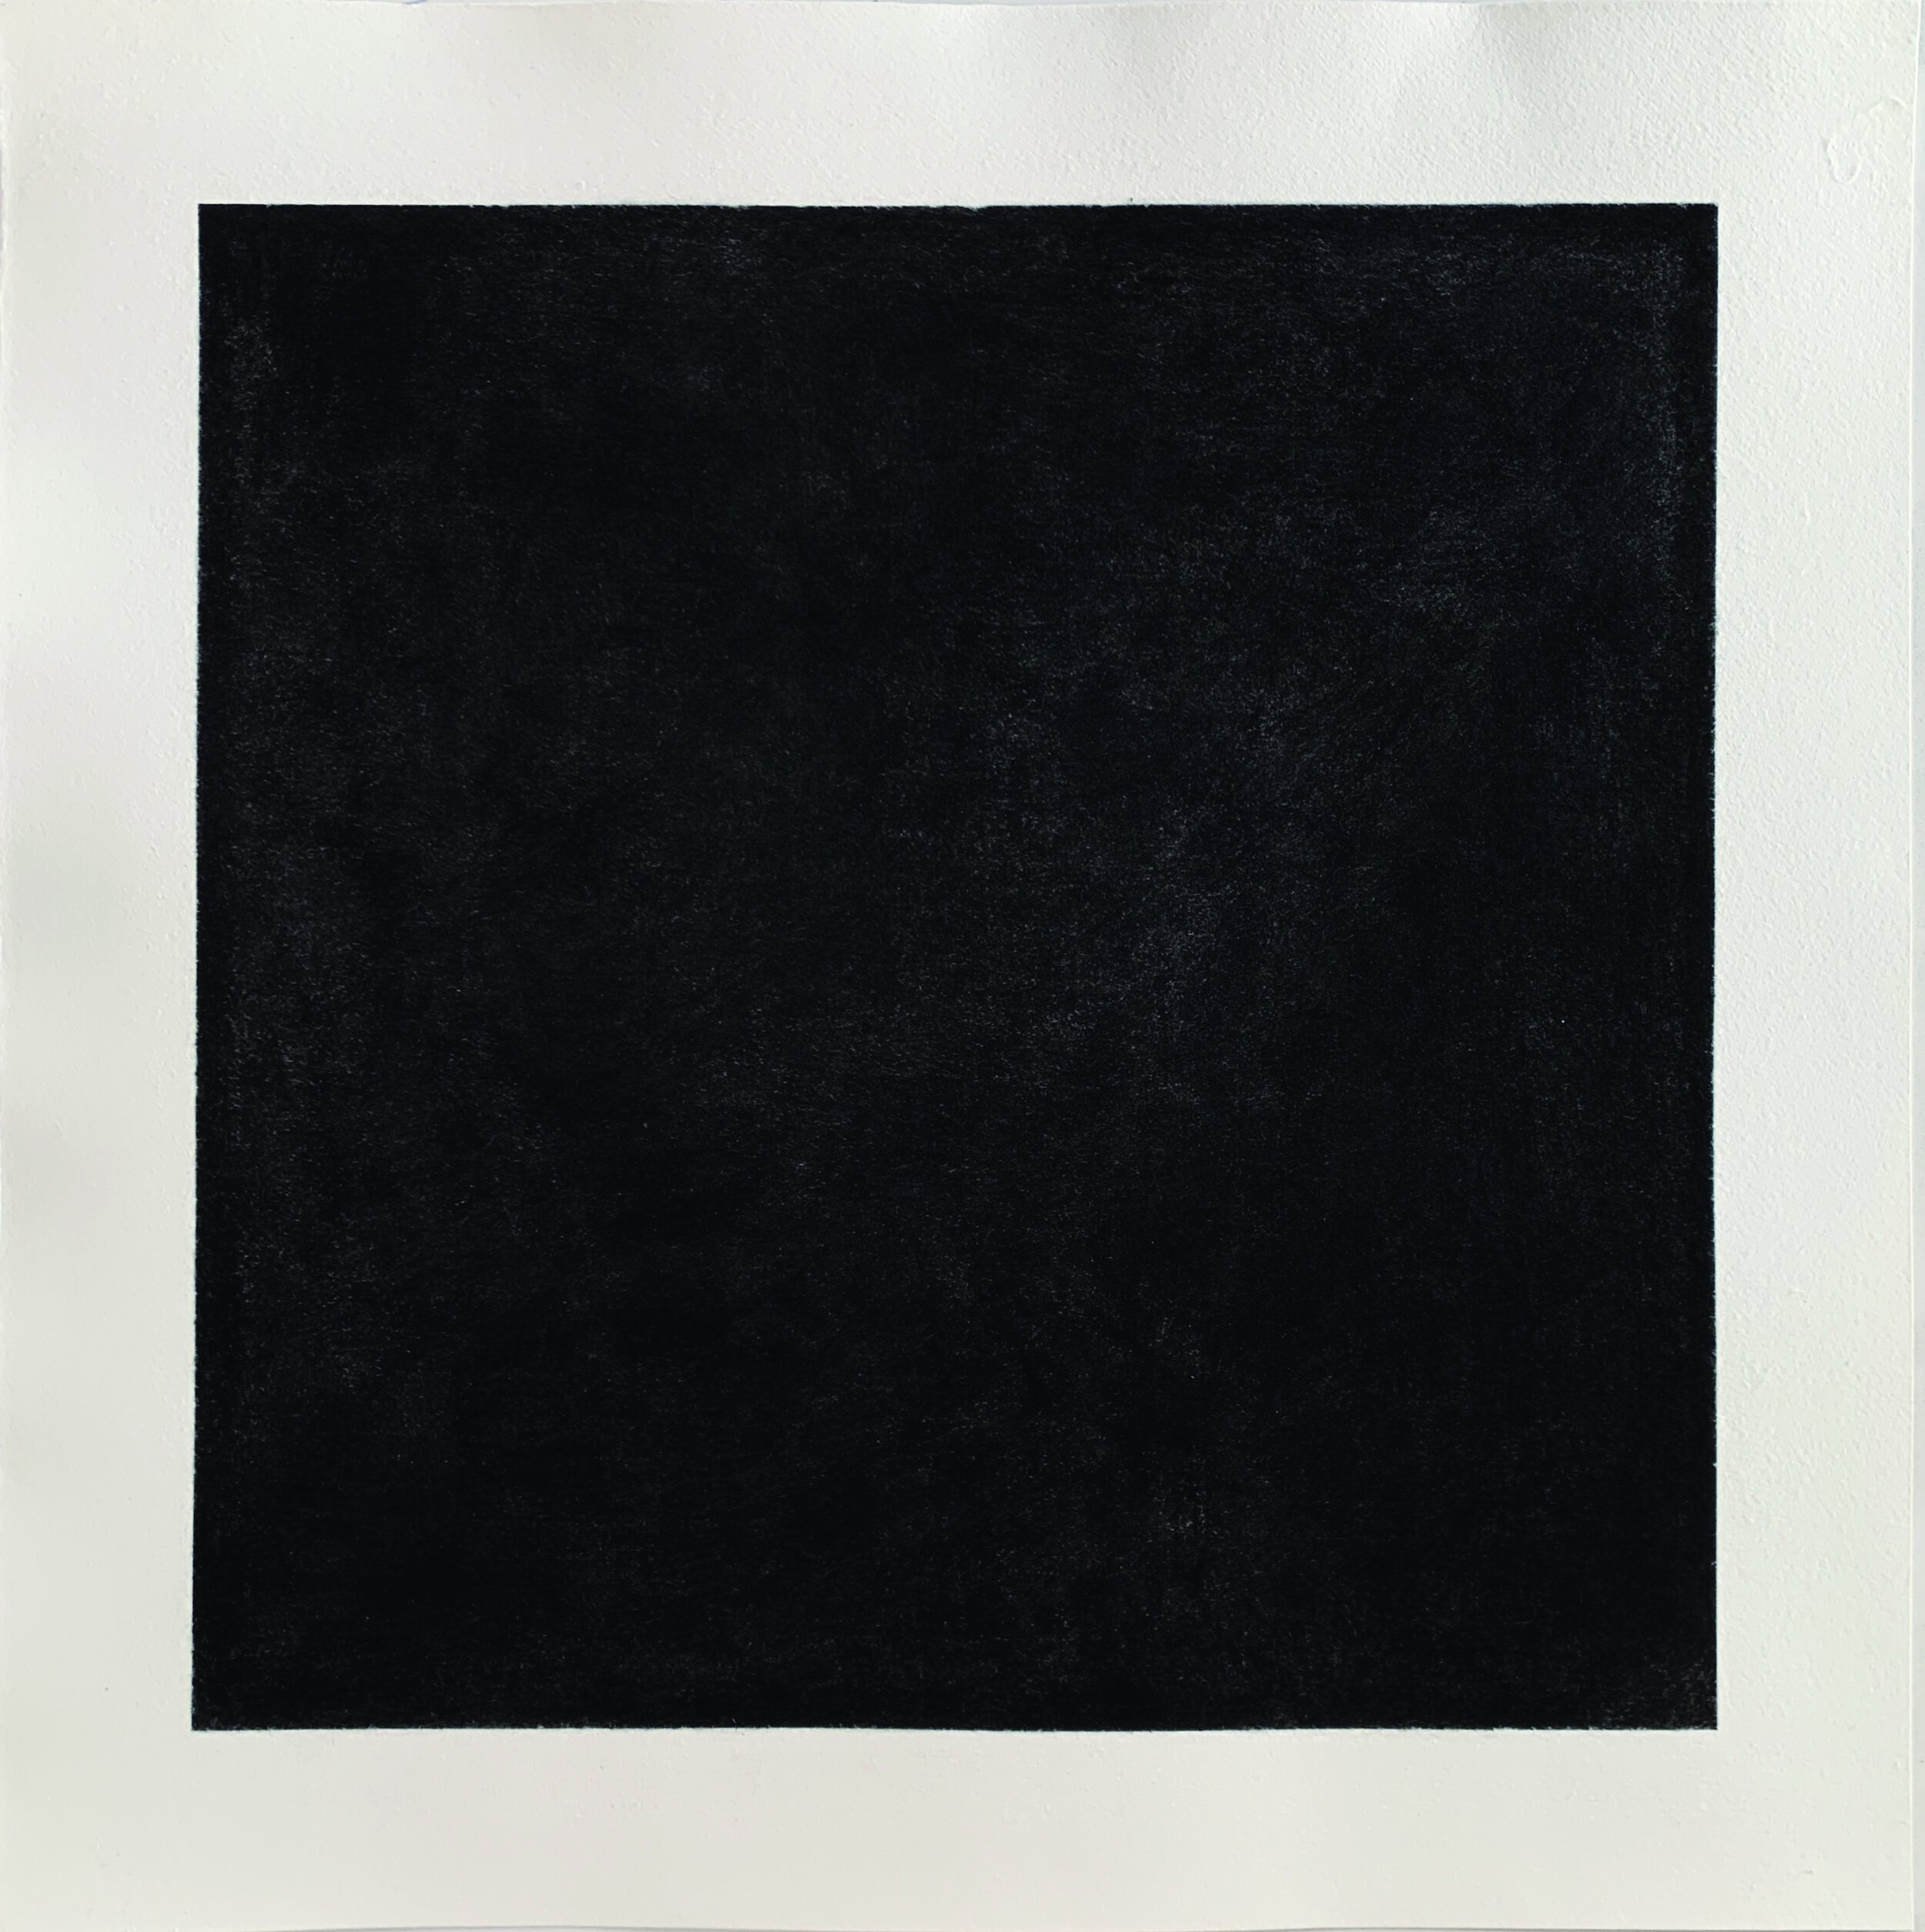 ‘Black Square’ (After Kasimir Malevich) 1929